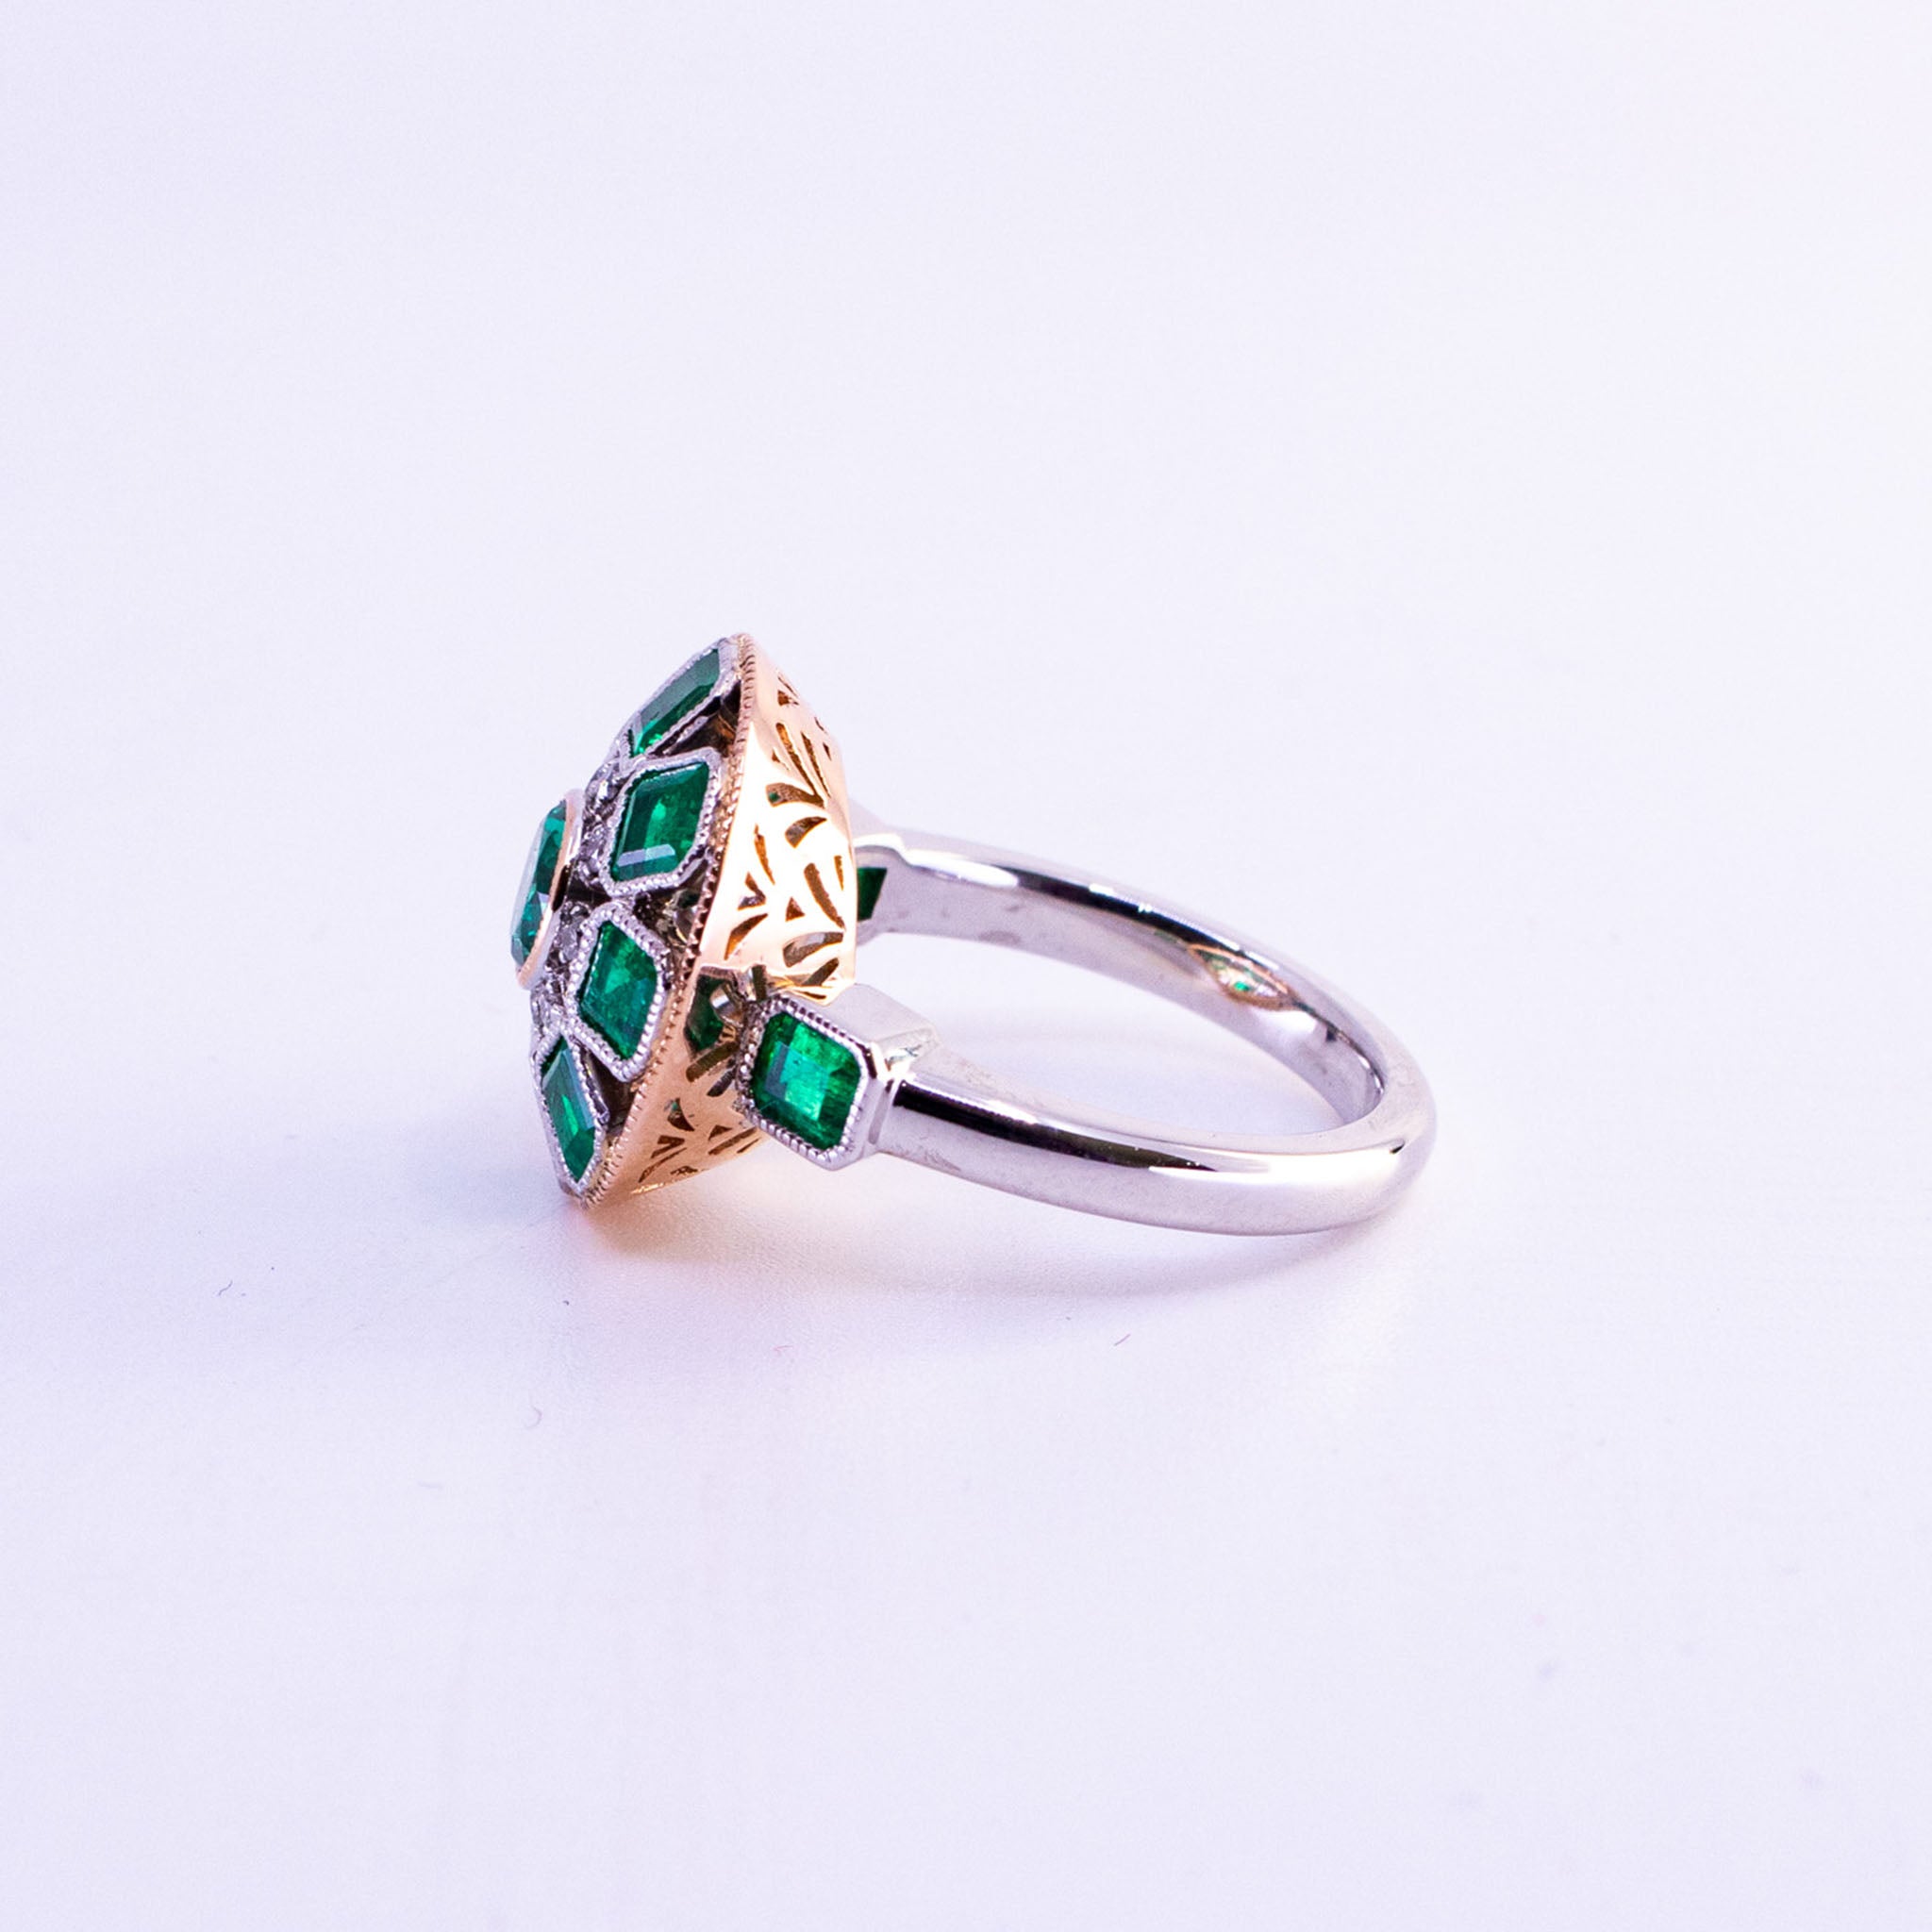 Columbian Emerald Ring with Art Deco Detail